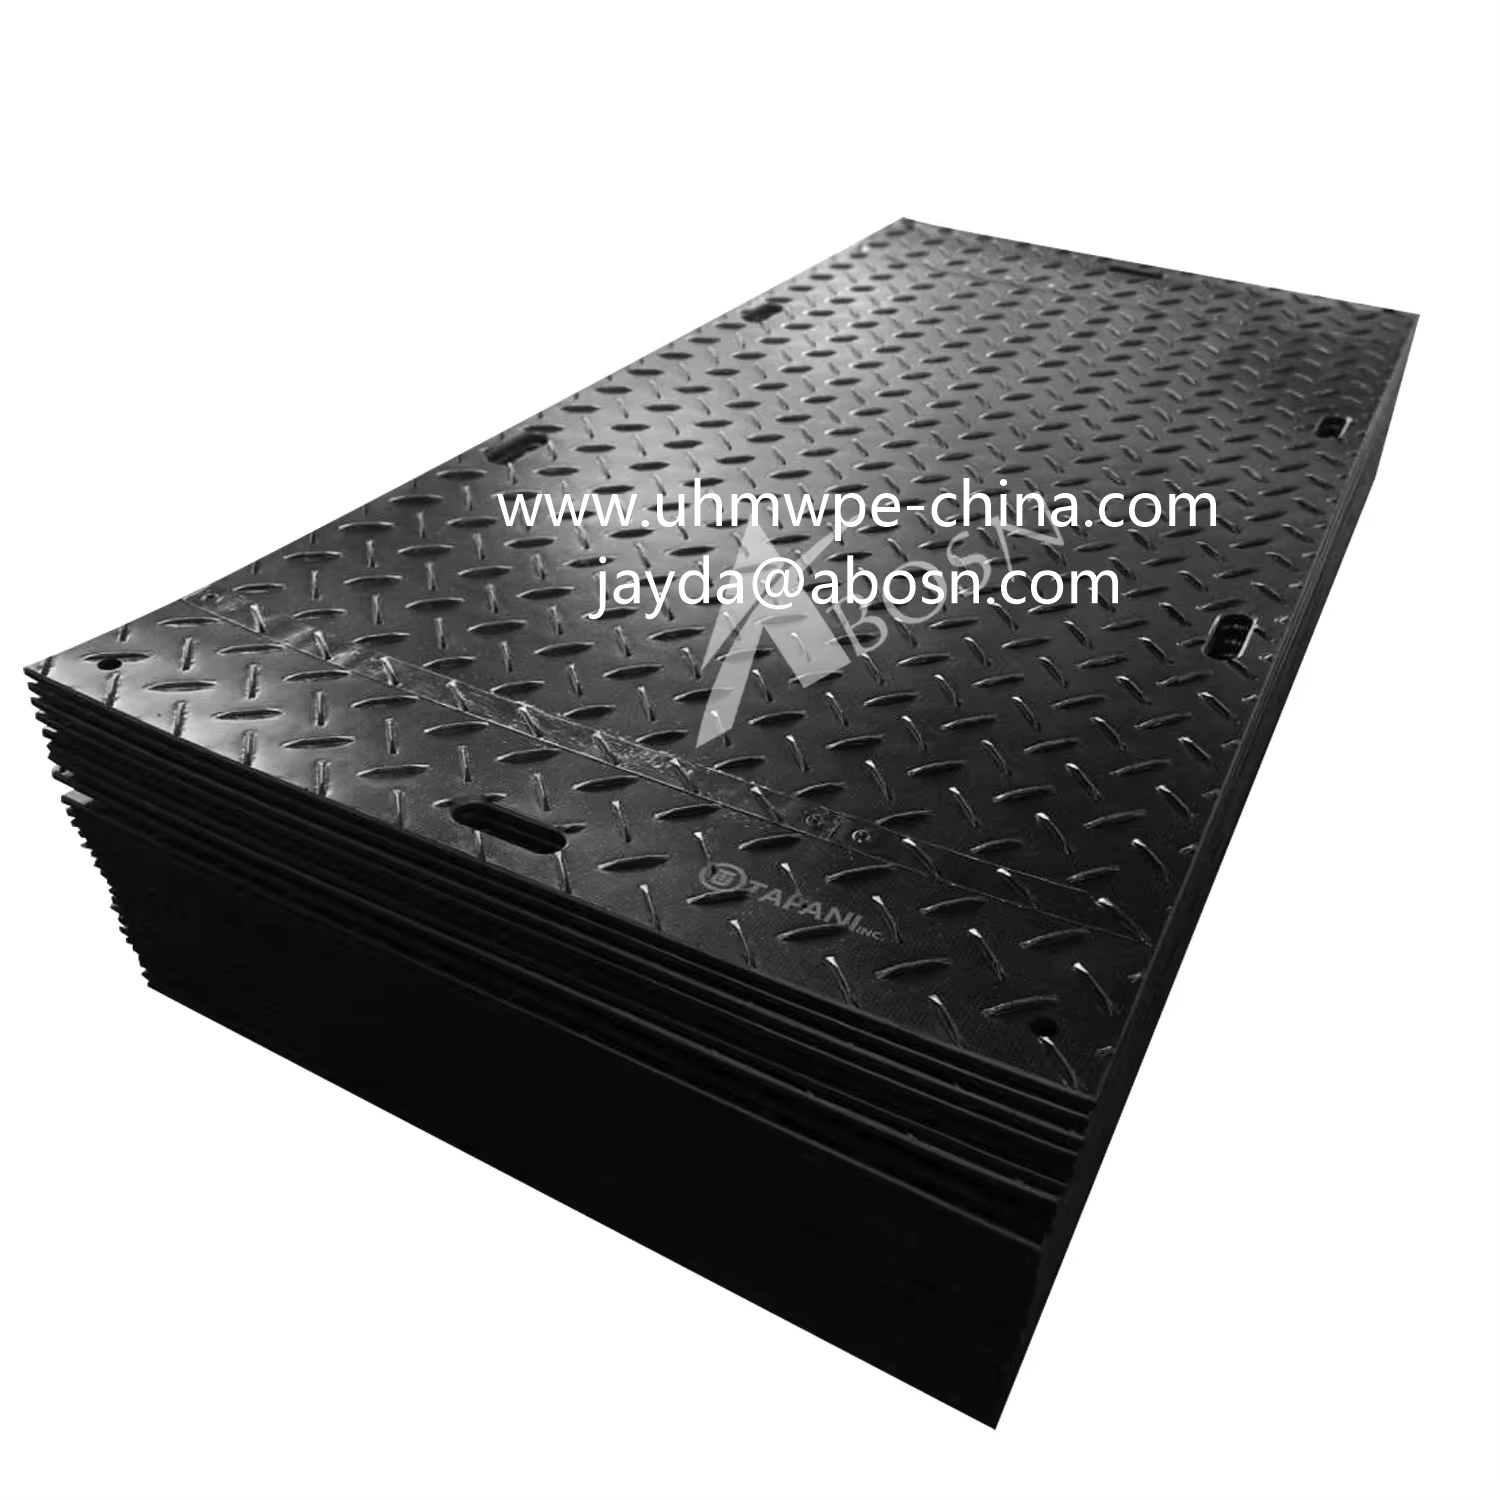 Heavy-Duty HDPE Ground Protection Mats for Outdoor Events